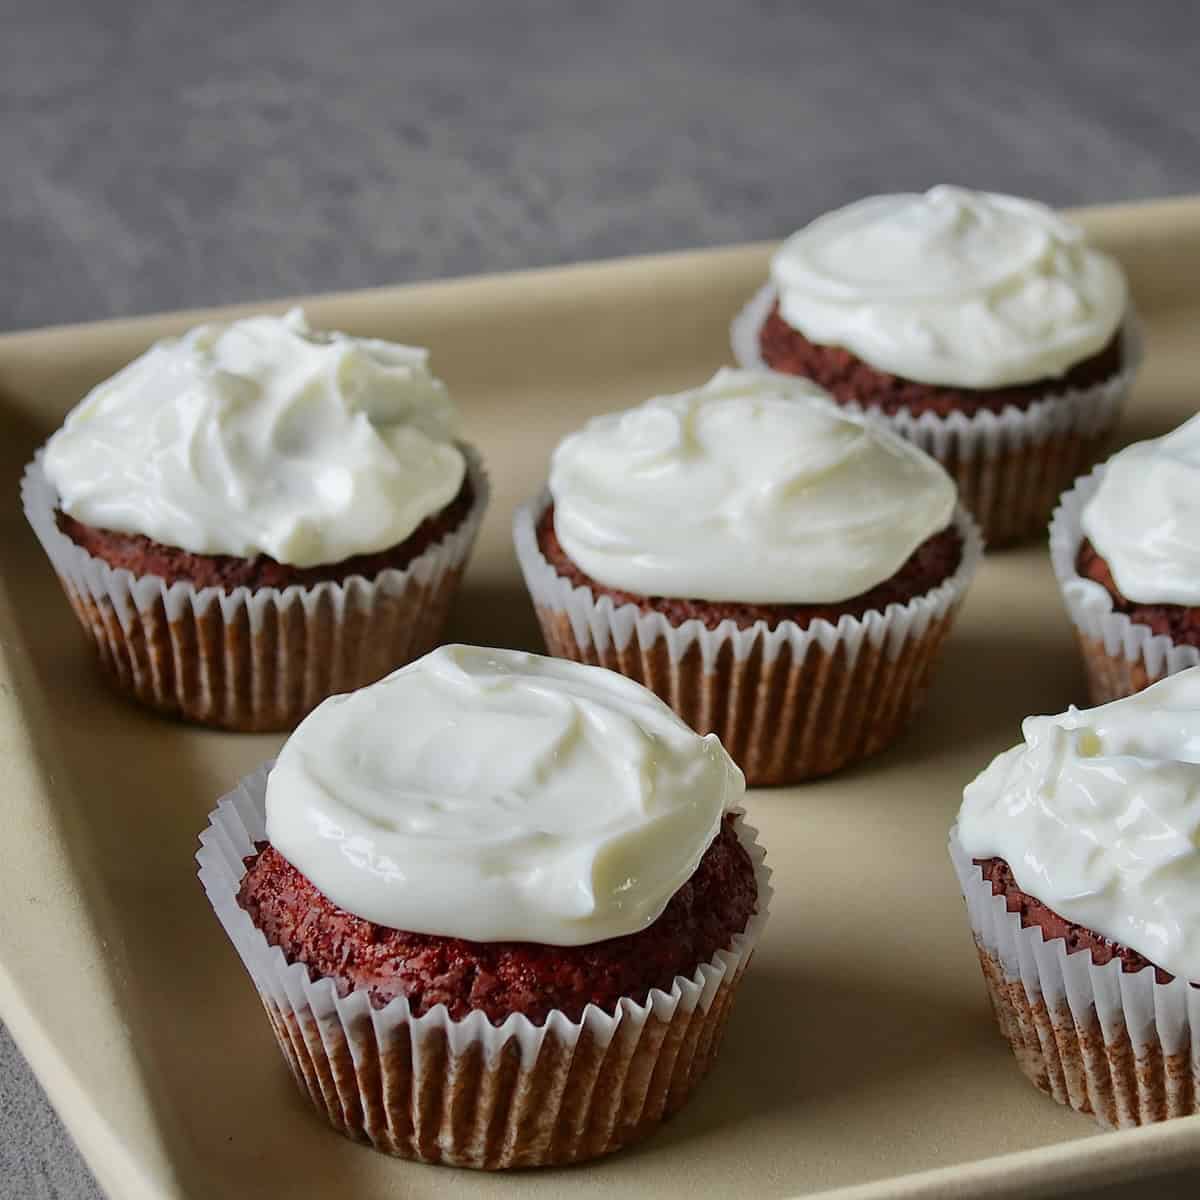 Frosted red velvet cupcakes